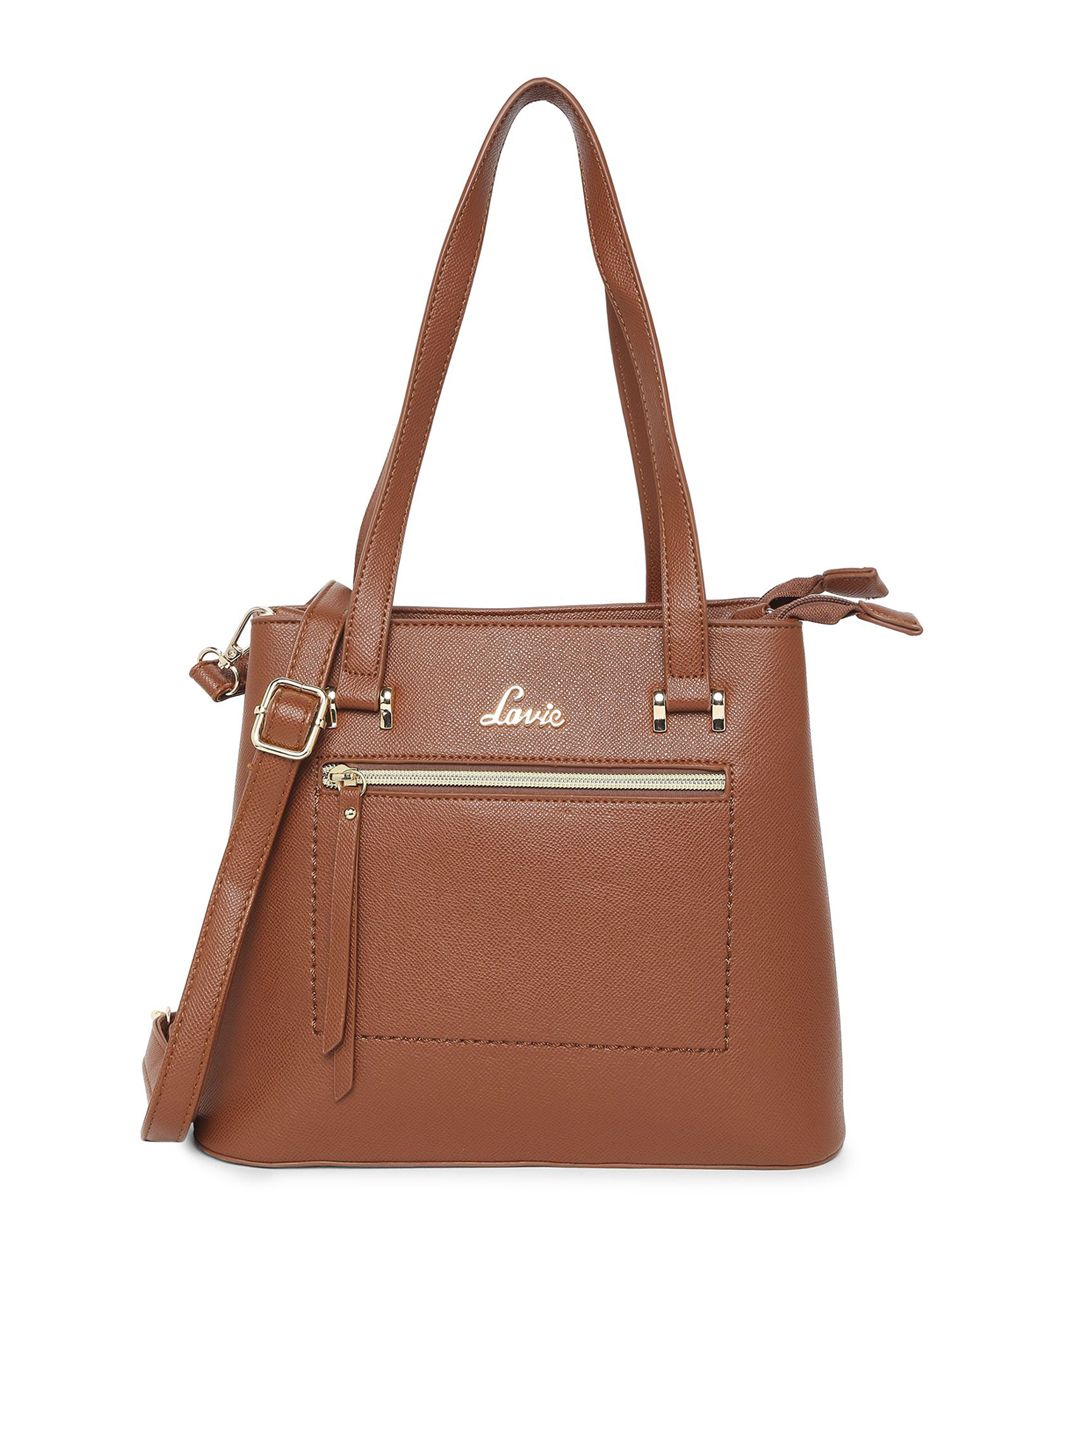 Lavie Brown Solid Structured Shoulder Bag Price in India